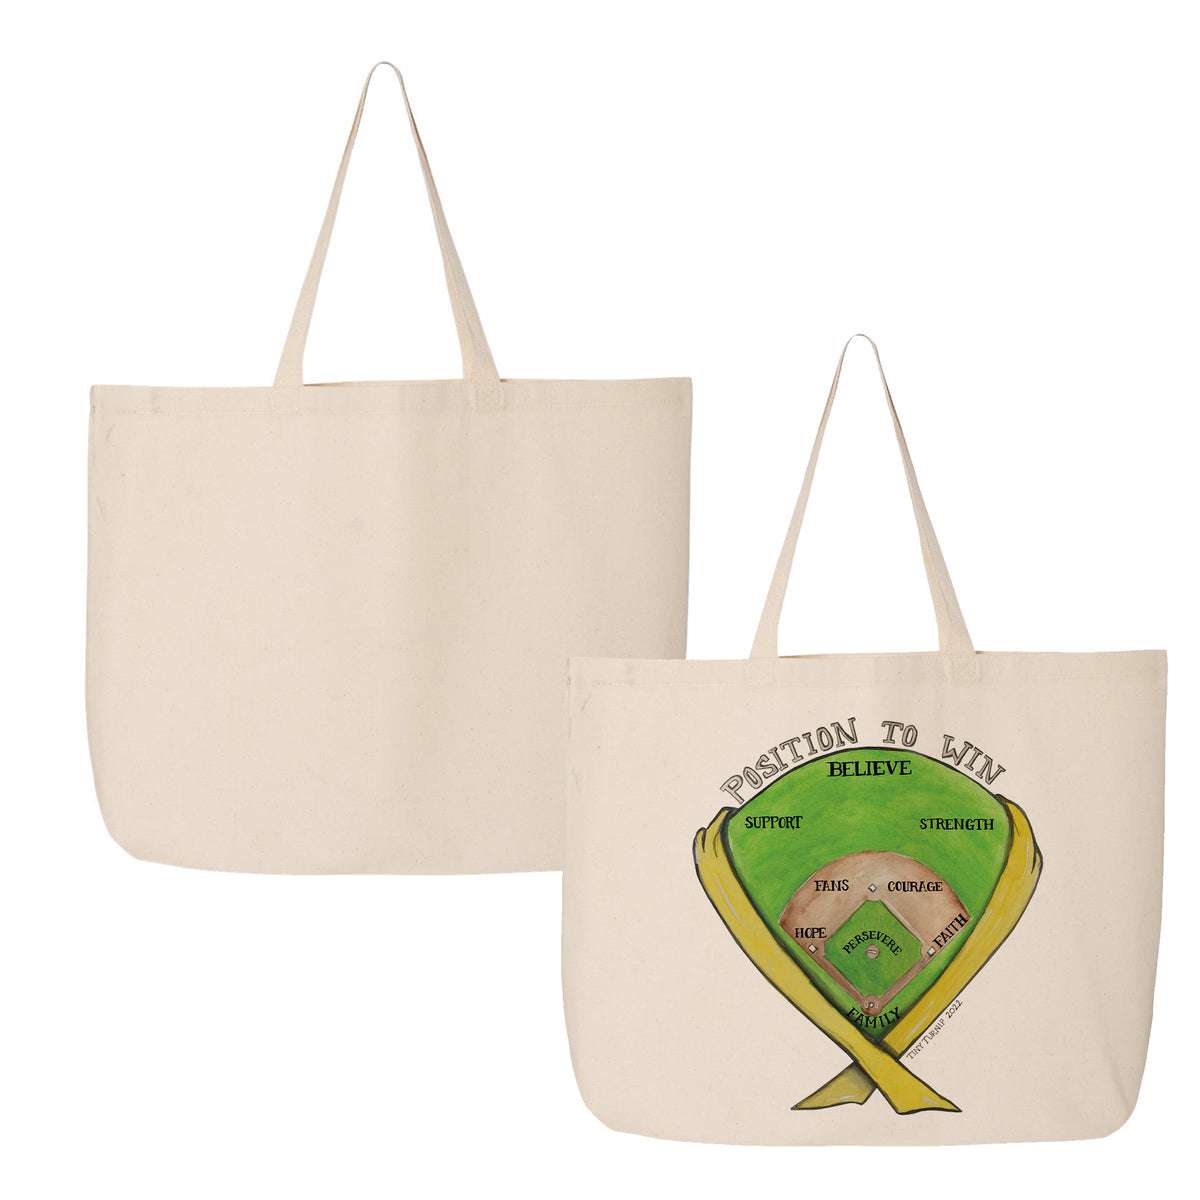 Tiny Turnip "Position To Win" Canvas Tote Bag